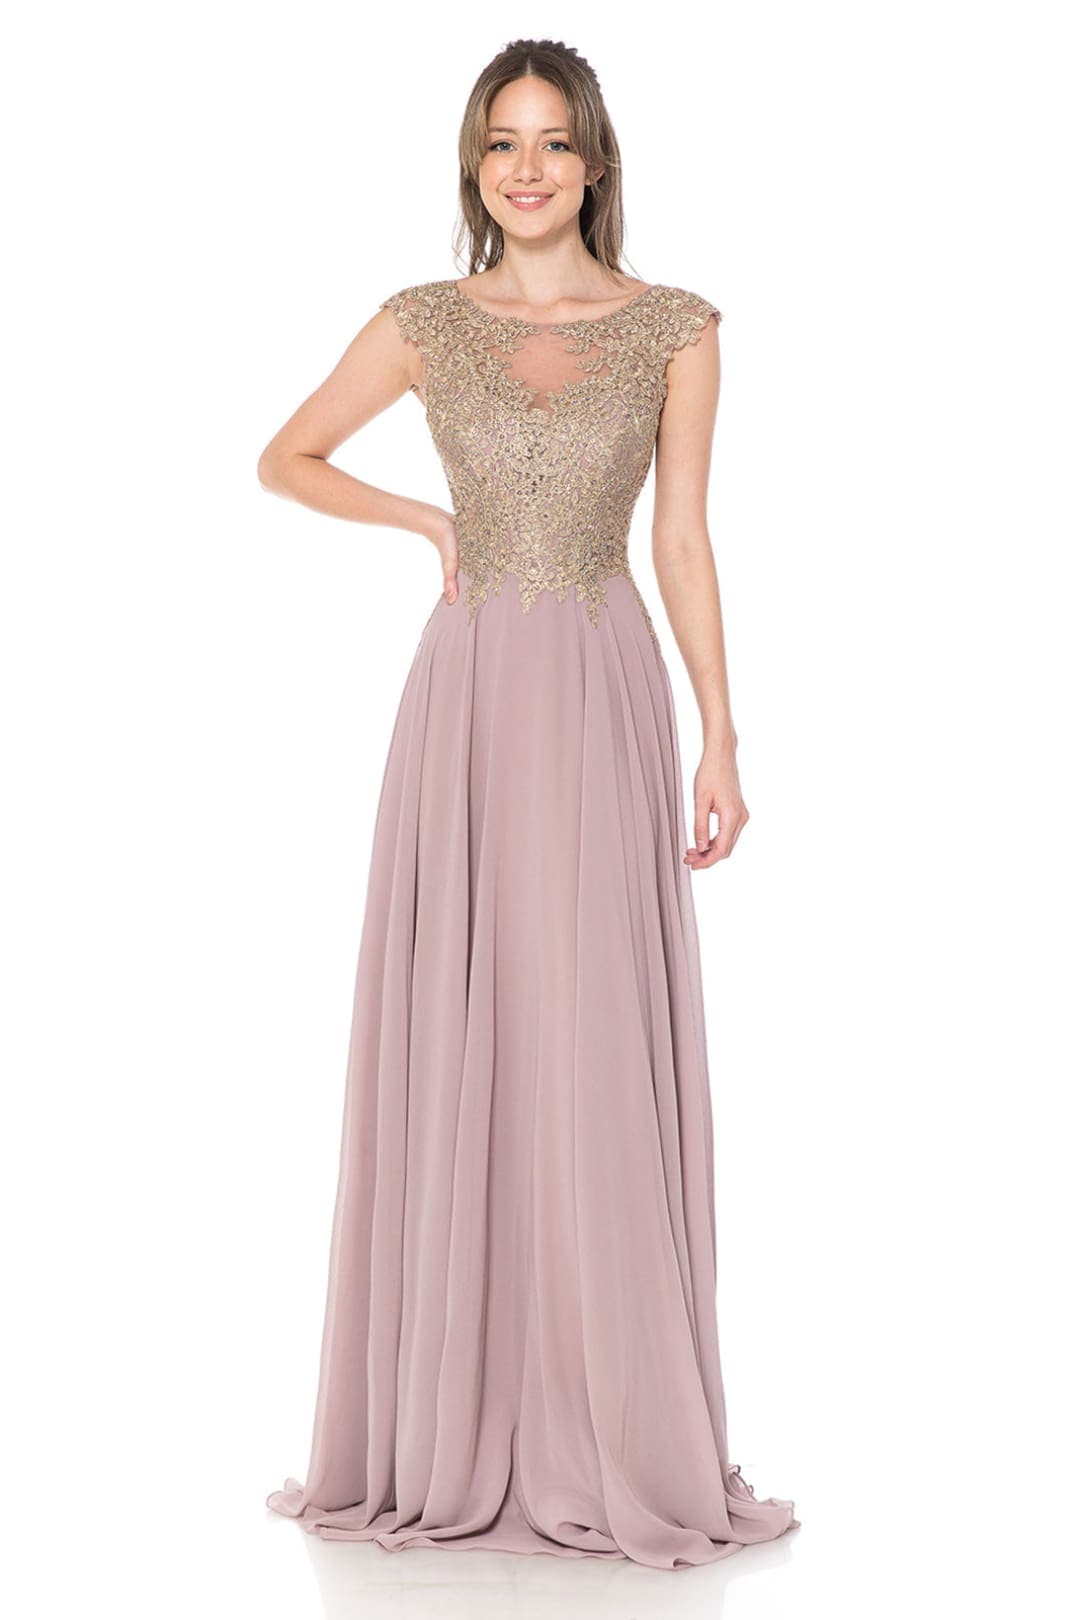 Classy Special Occasion Gown - DUSTY ROSE / XS